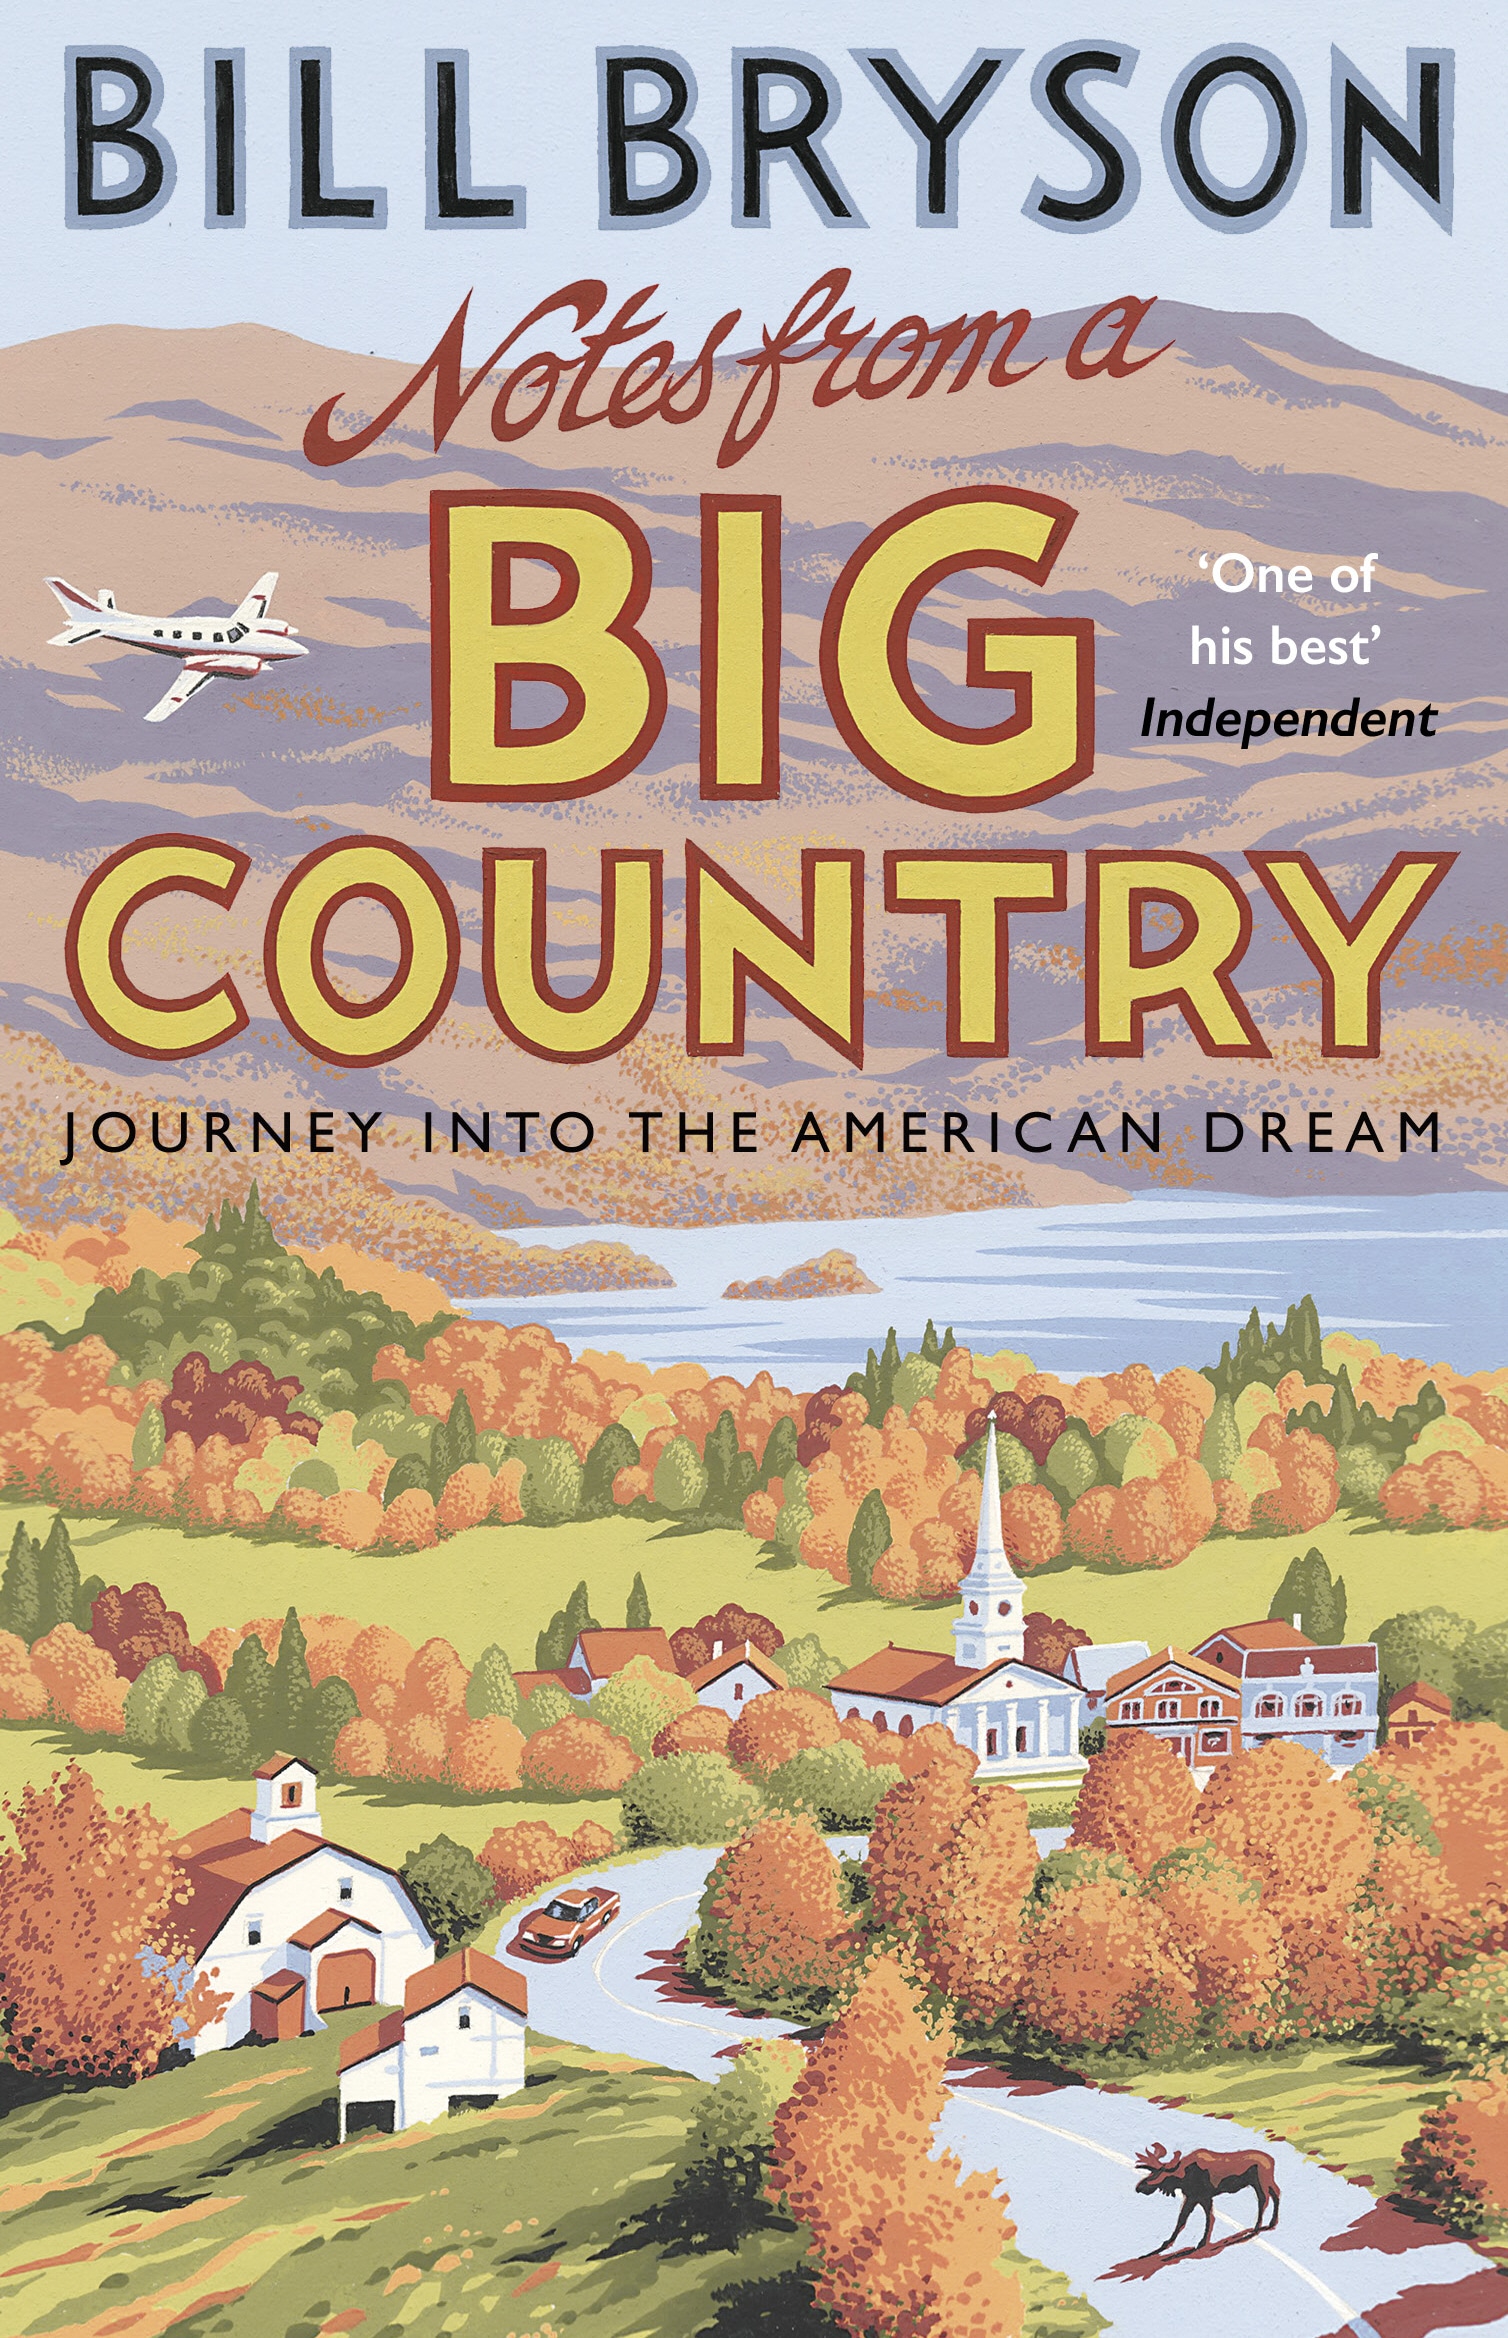 Book “Notes From A Big Country” by Bill Bryson — March 24, 2016